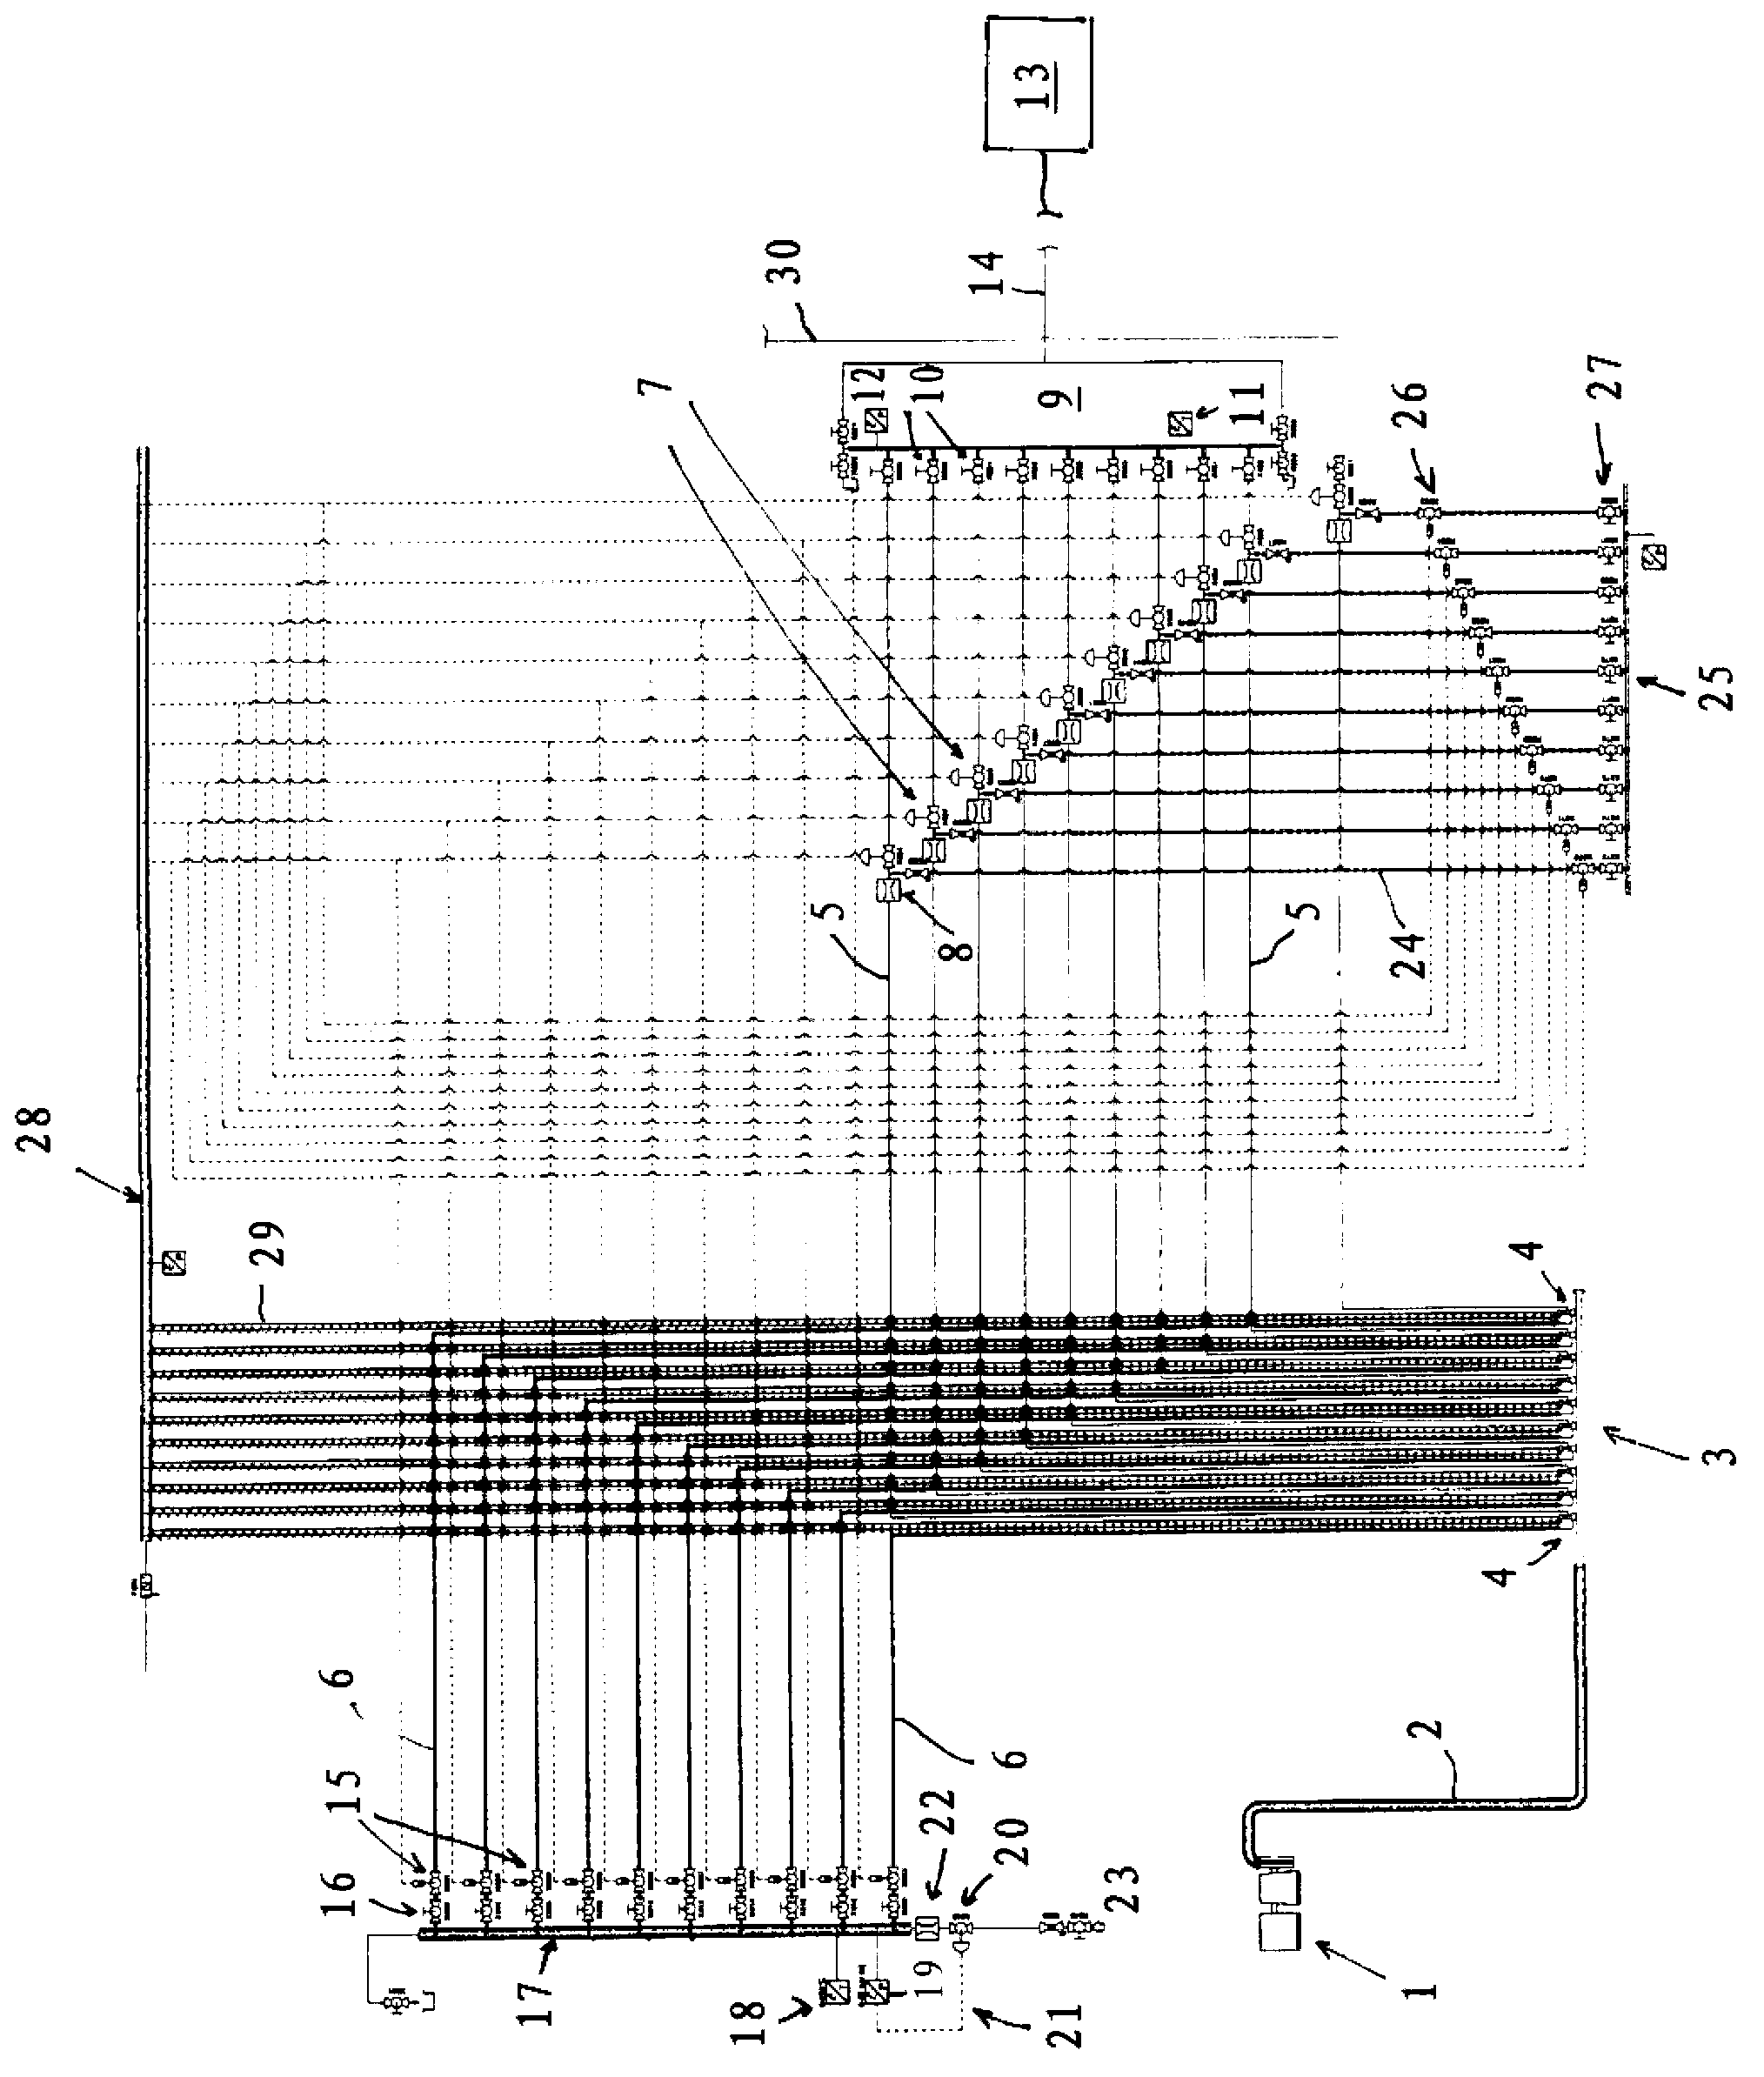 Device and method for gluing fibers